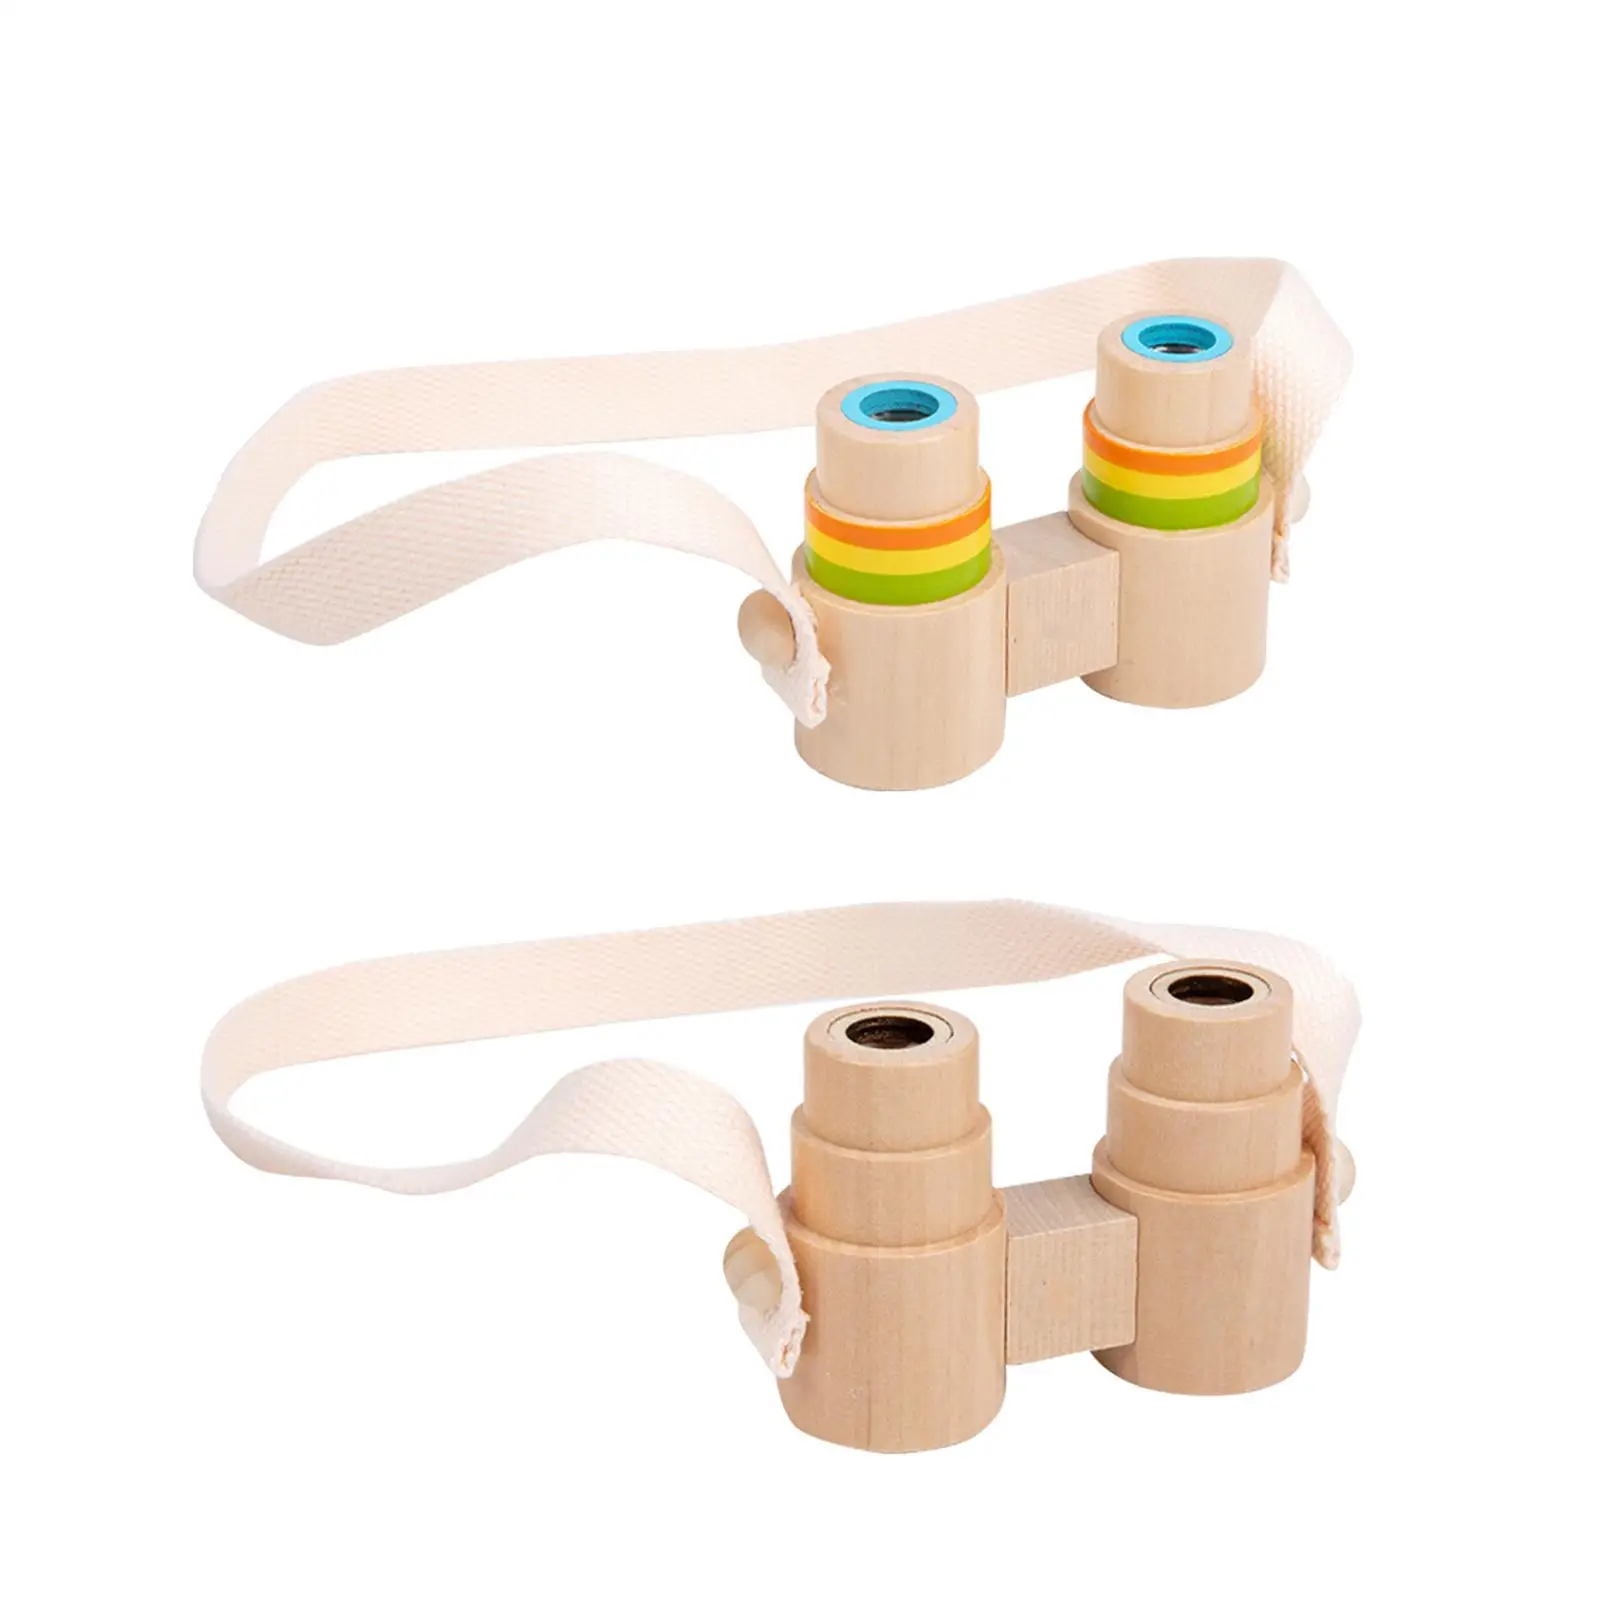 Wooden Binoculars Toy and Strap Children Magnification Toy Outdoor Toys for Boys Girls Toddlers Hiking Exploration